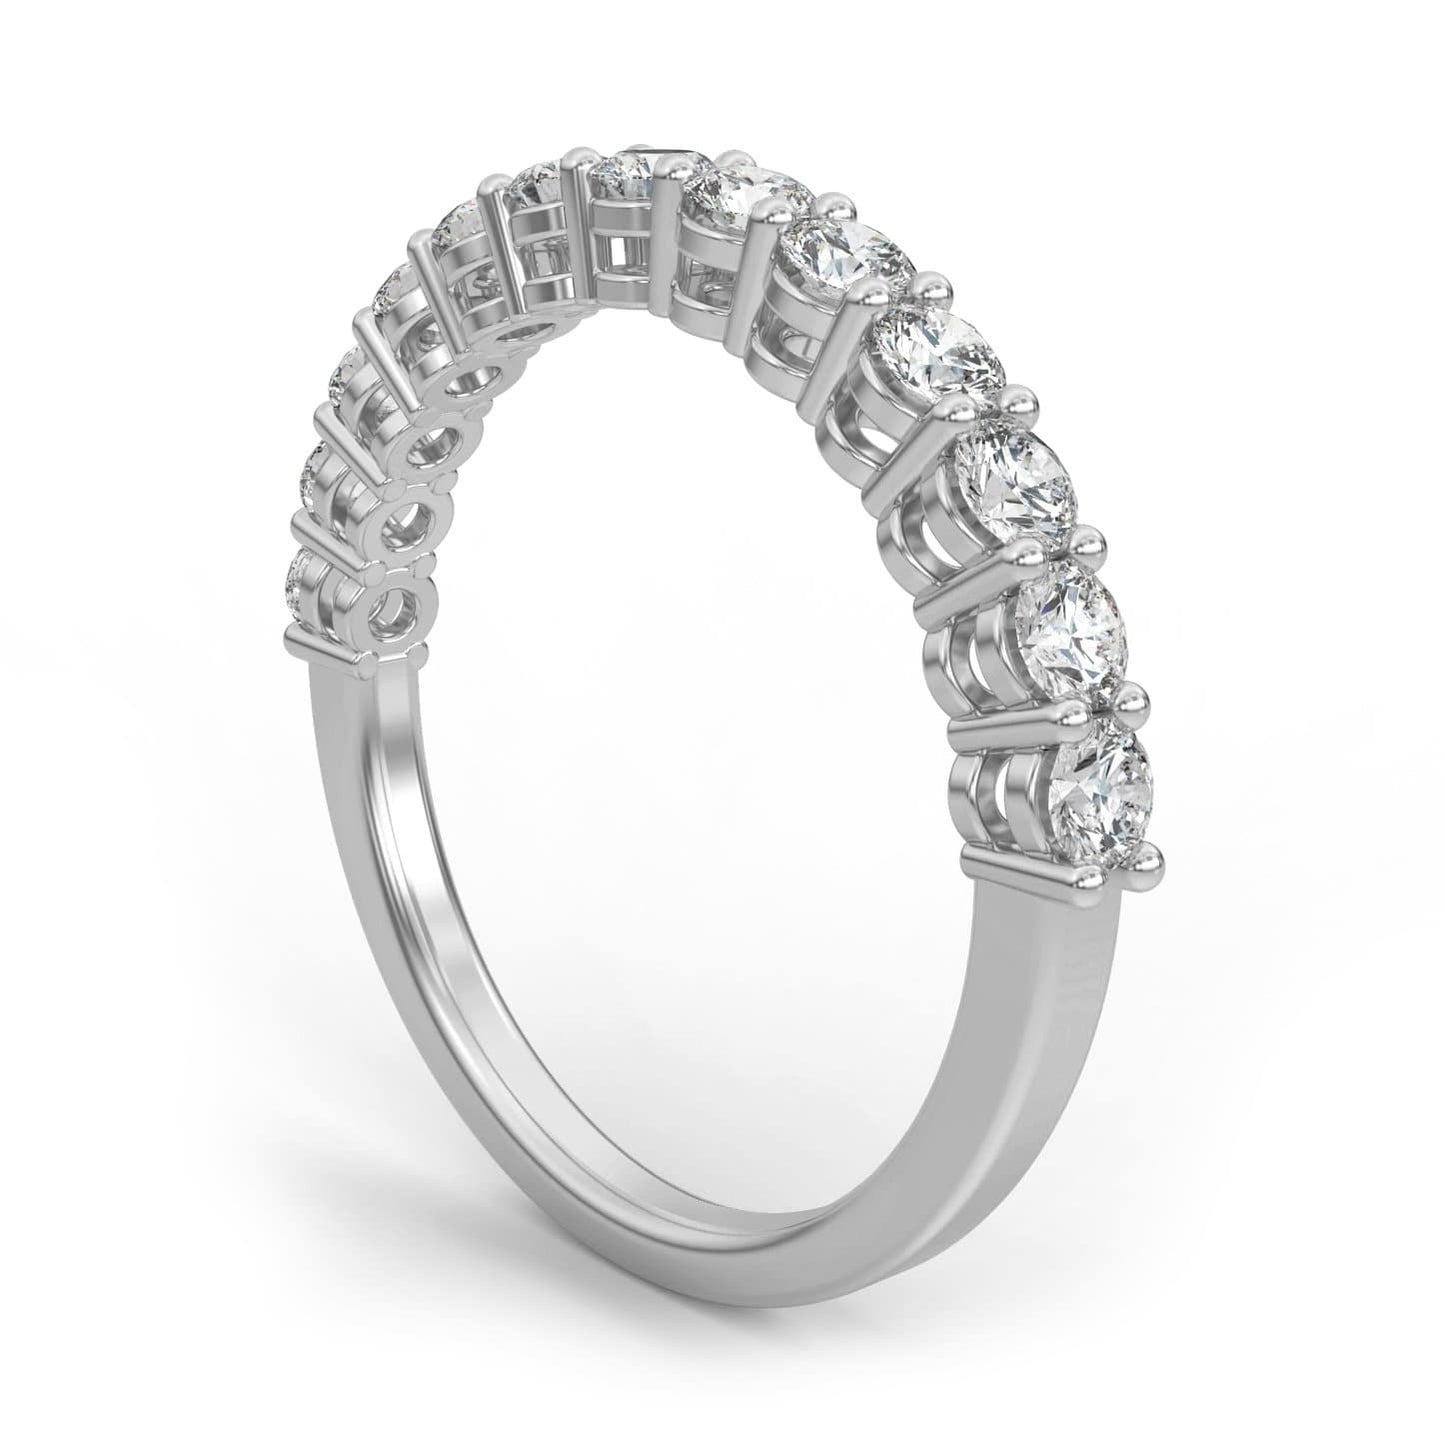 1ct Basket Prong Semi-Eternity Ring in 14k Gold